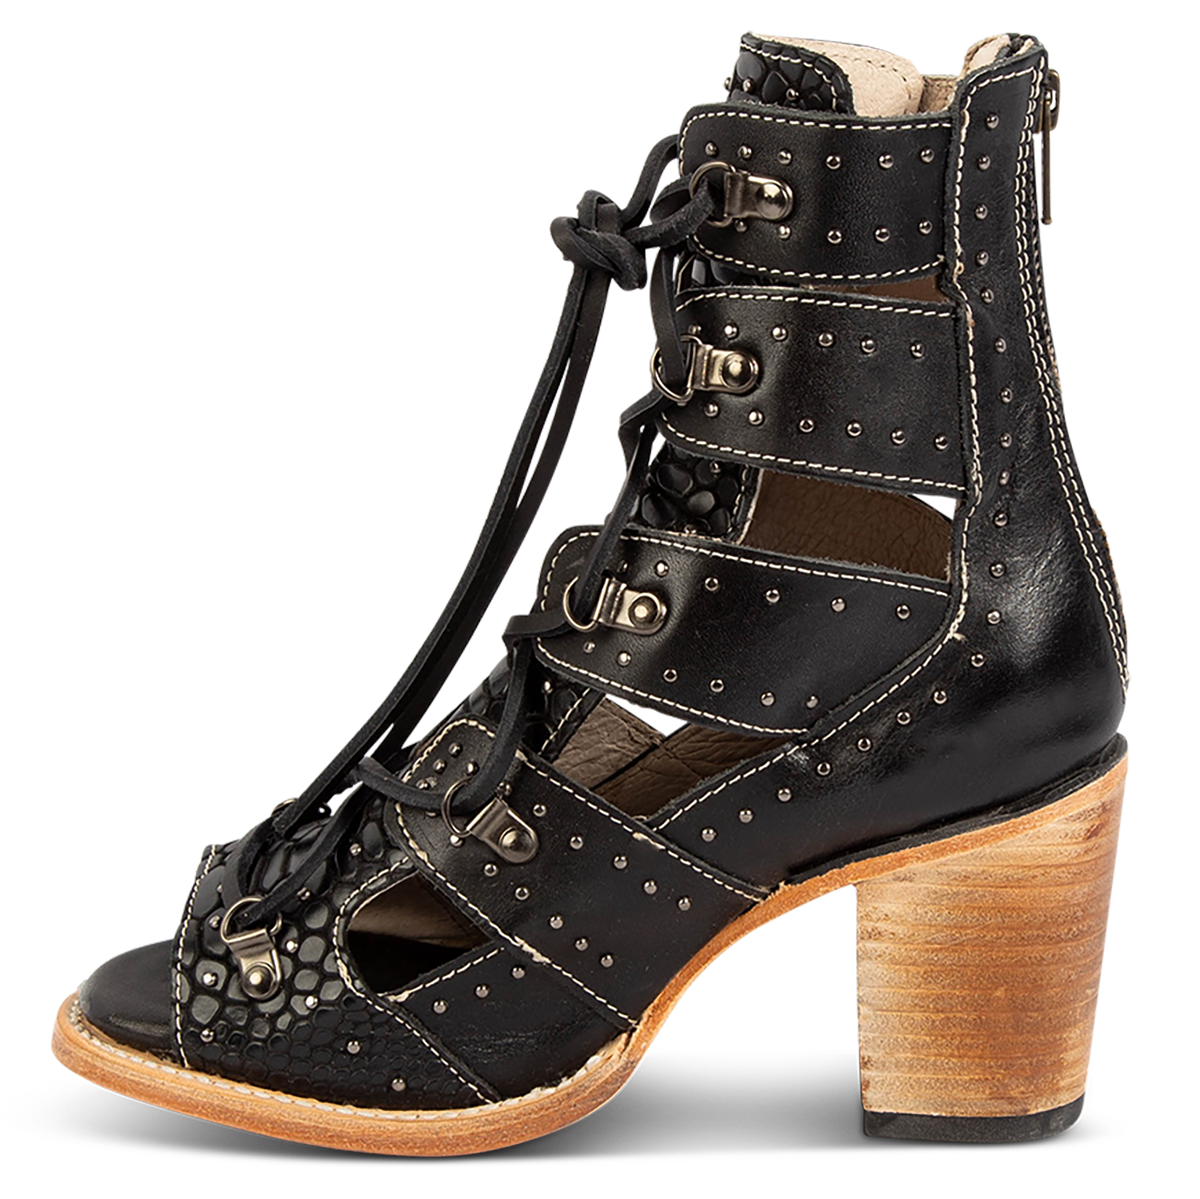 Inside view showing a stacked heel, criss cross leather lacing and stud embellishments on FREEBIRD women's Brandy black snake embossed leather sandal